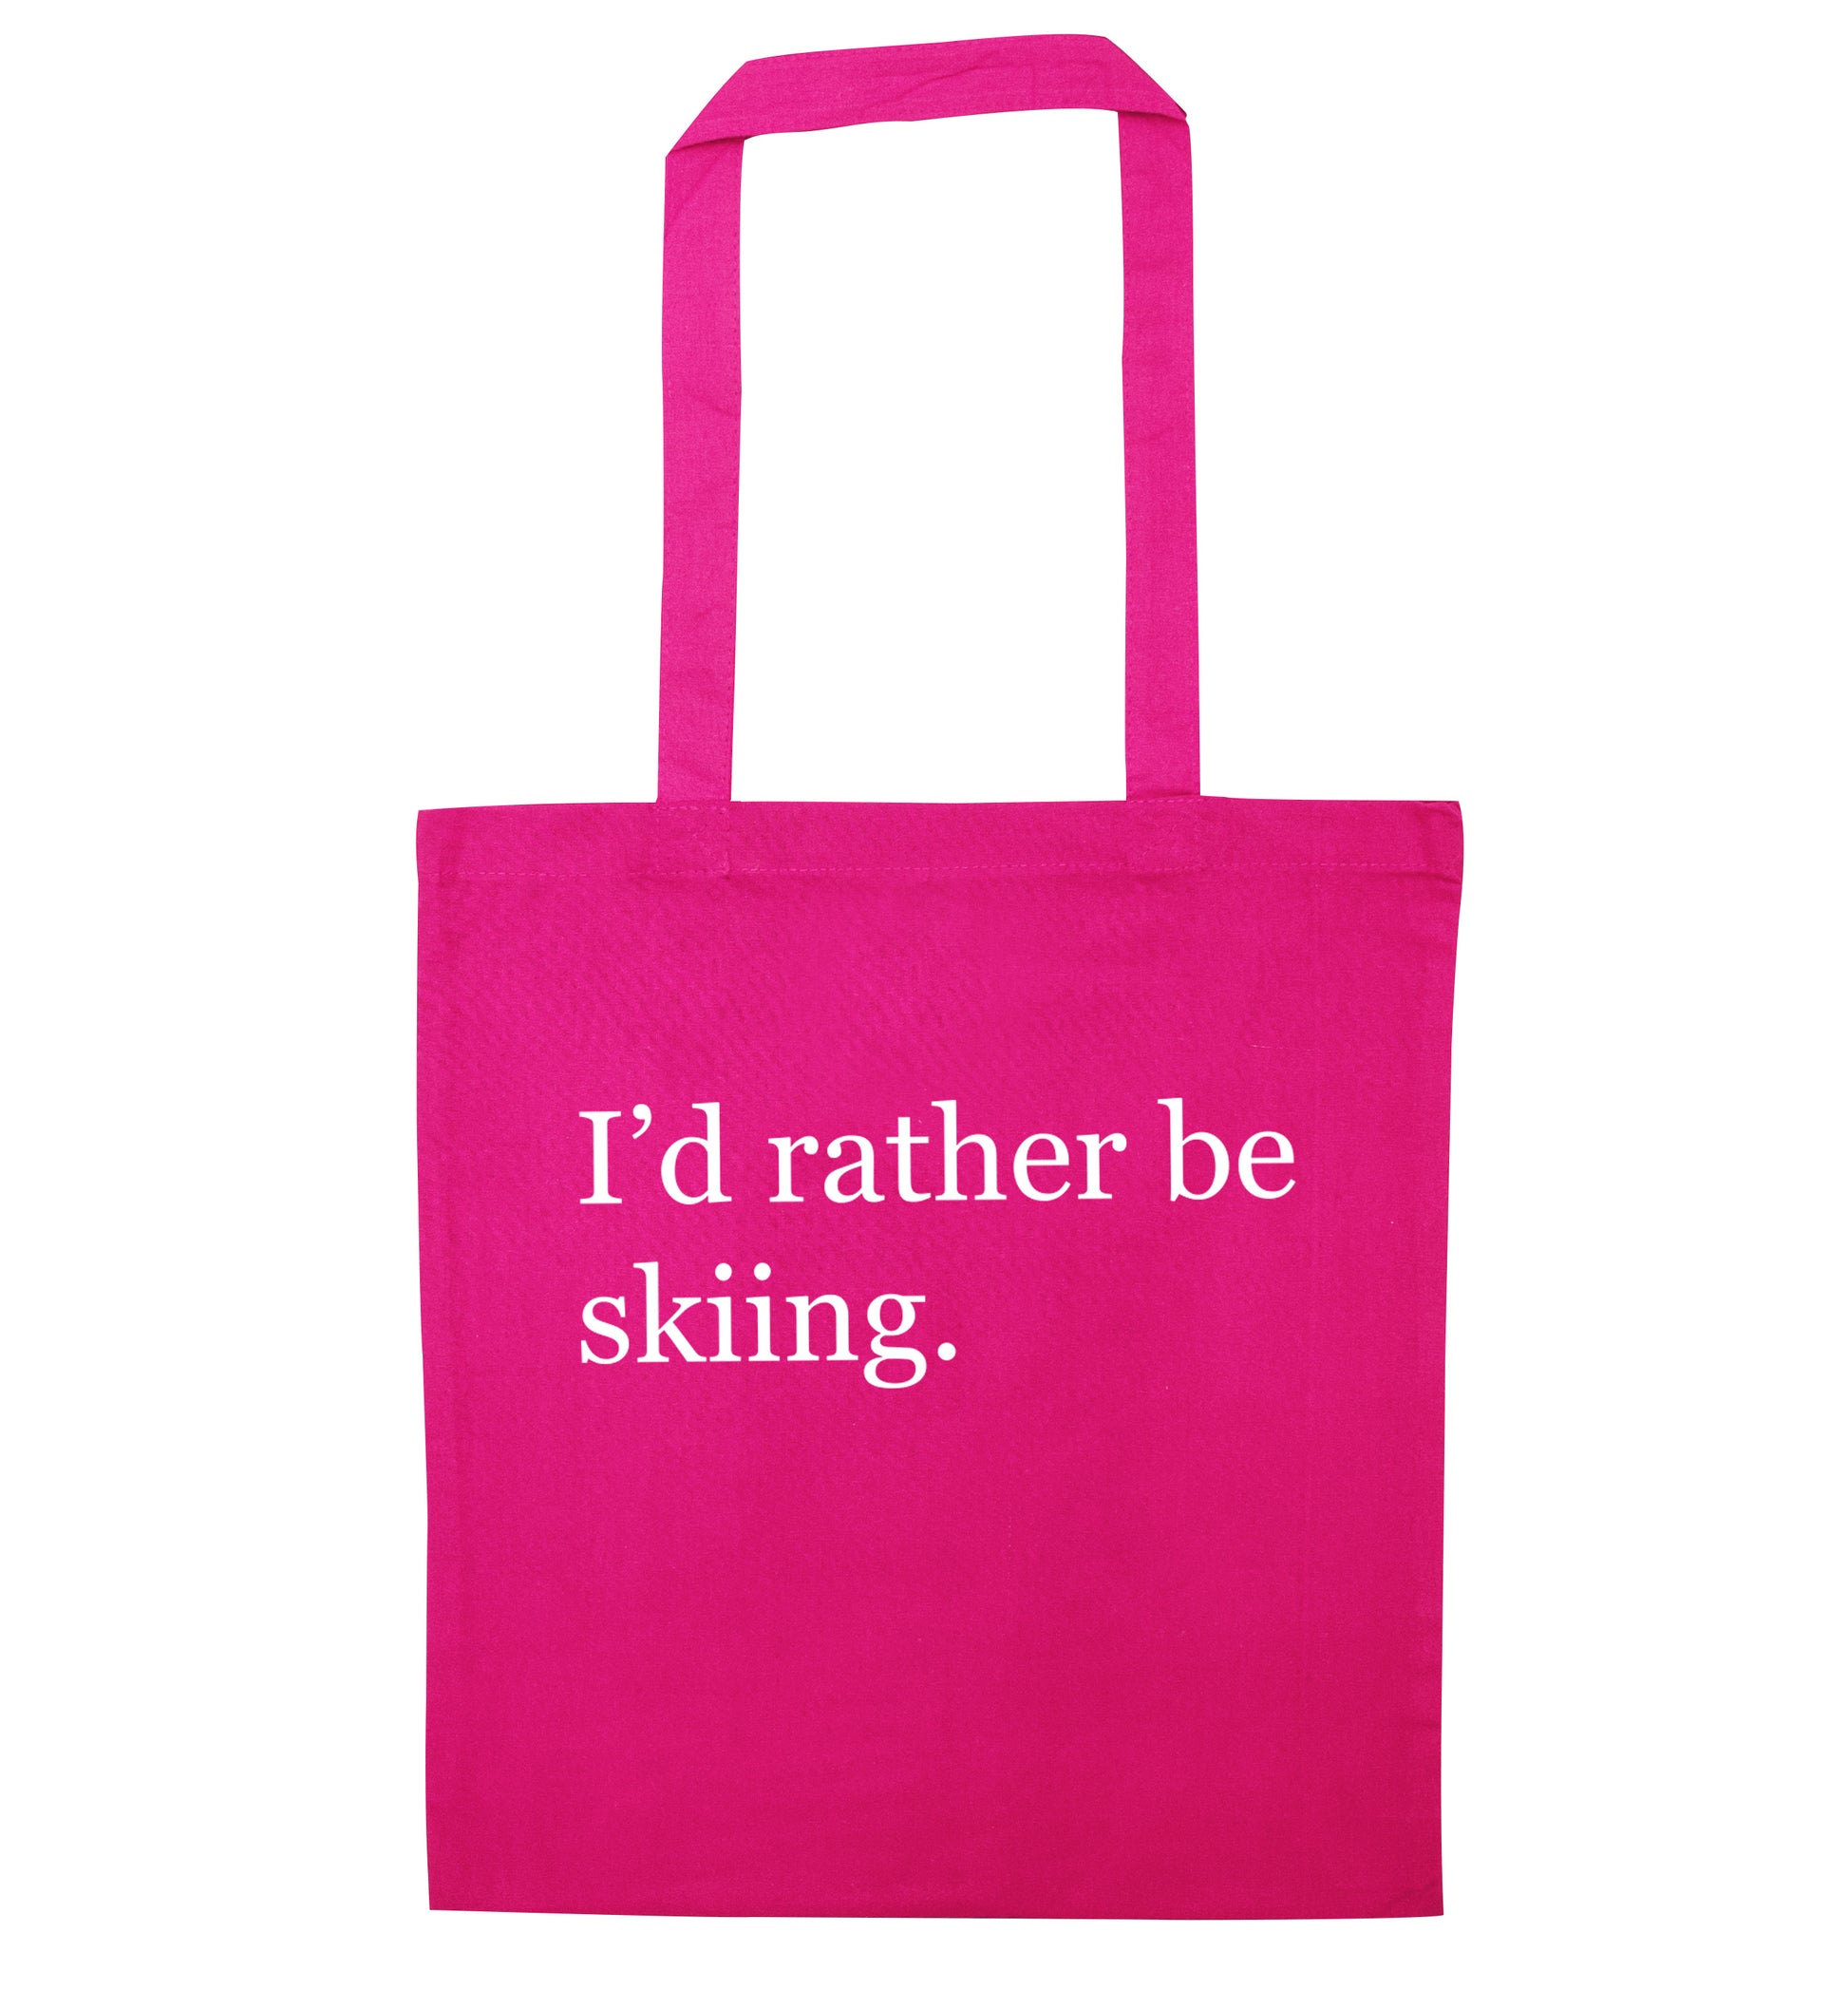 I'd rather be skiing pink tote bag